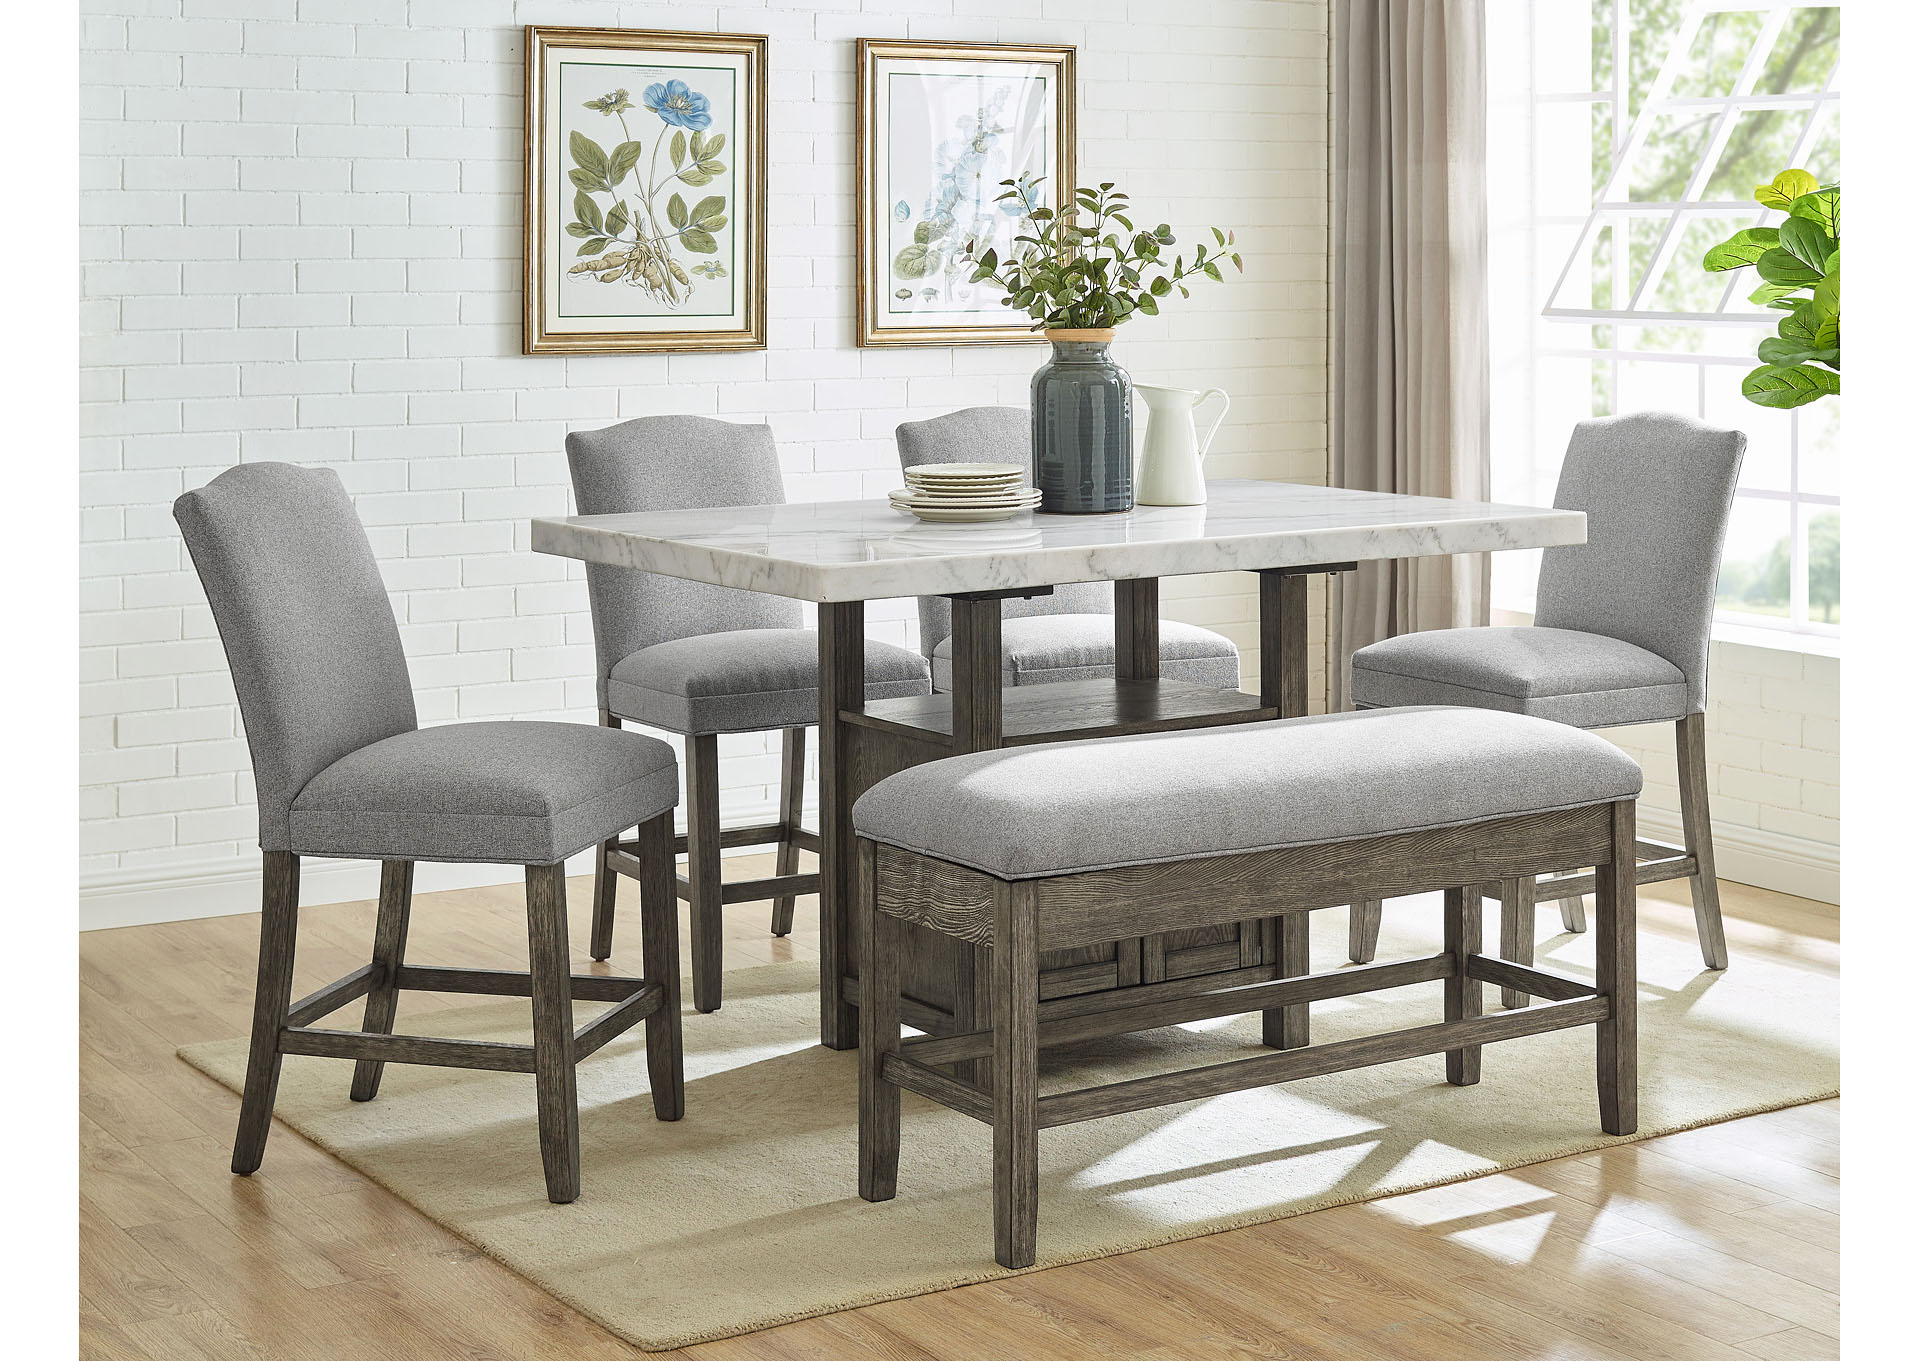 Grayson Grey Marble Top Counter Dining, Dining Room Set With 4 Chairs And Bench